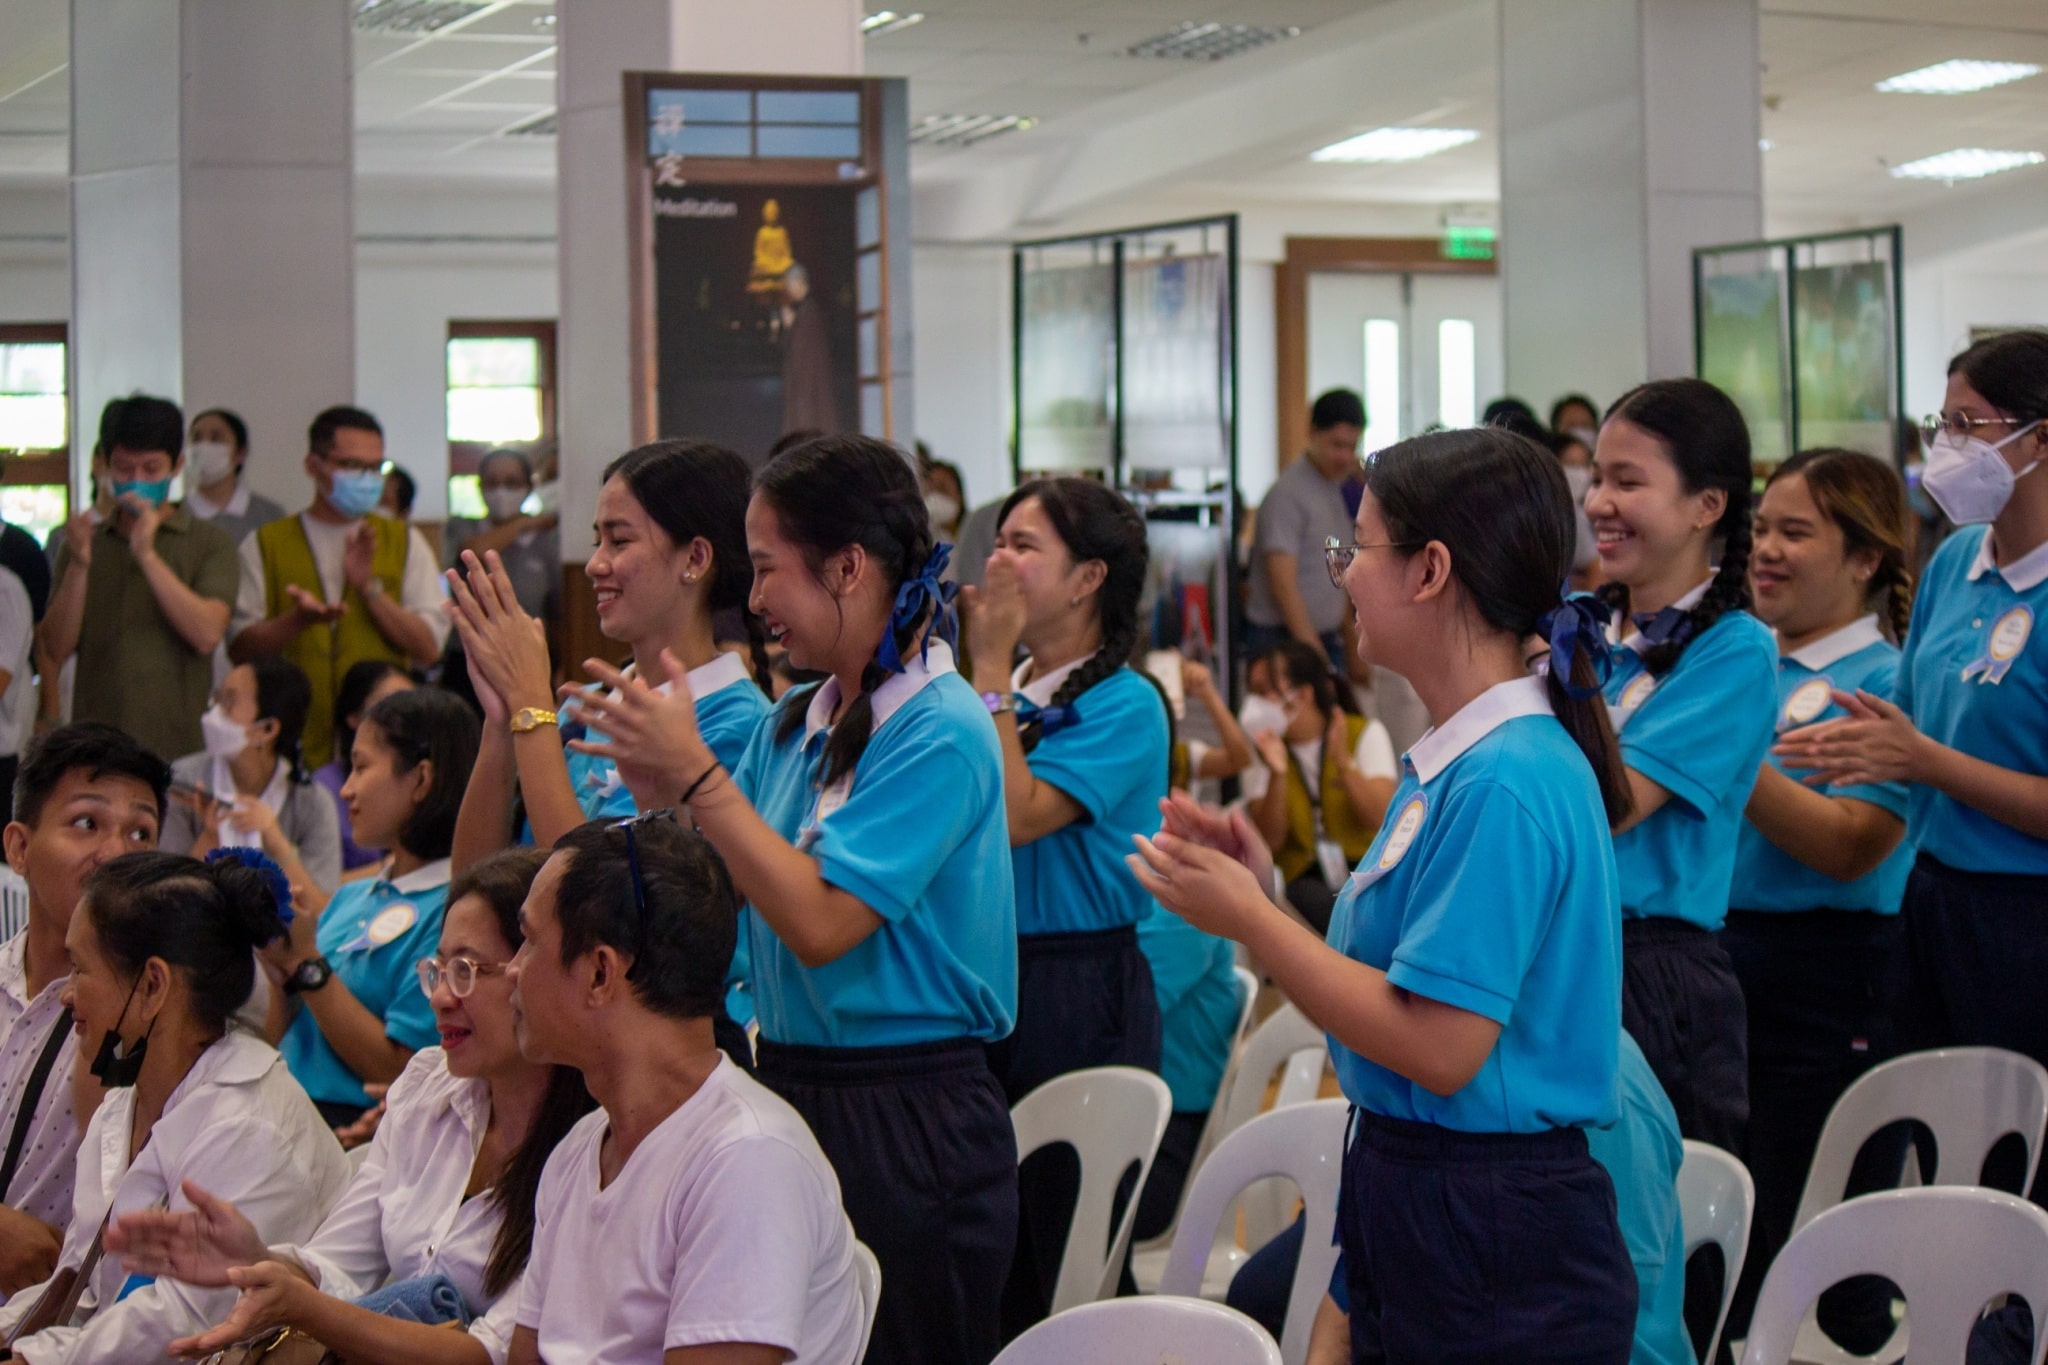 Scholars with Latin honors cheer in surprise as they were told of the cash incentives they’re receiving from Tzu Chi. 【Photo by Marella Saldonido】